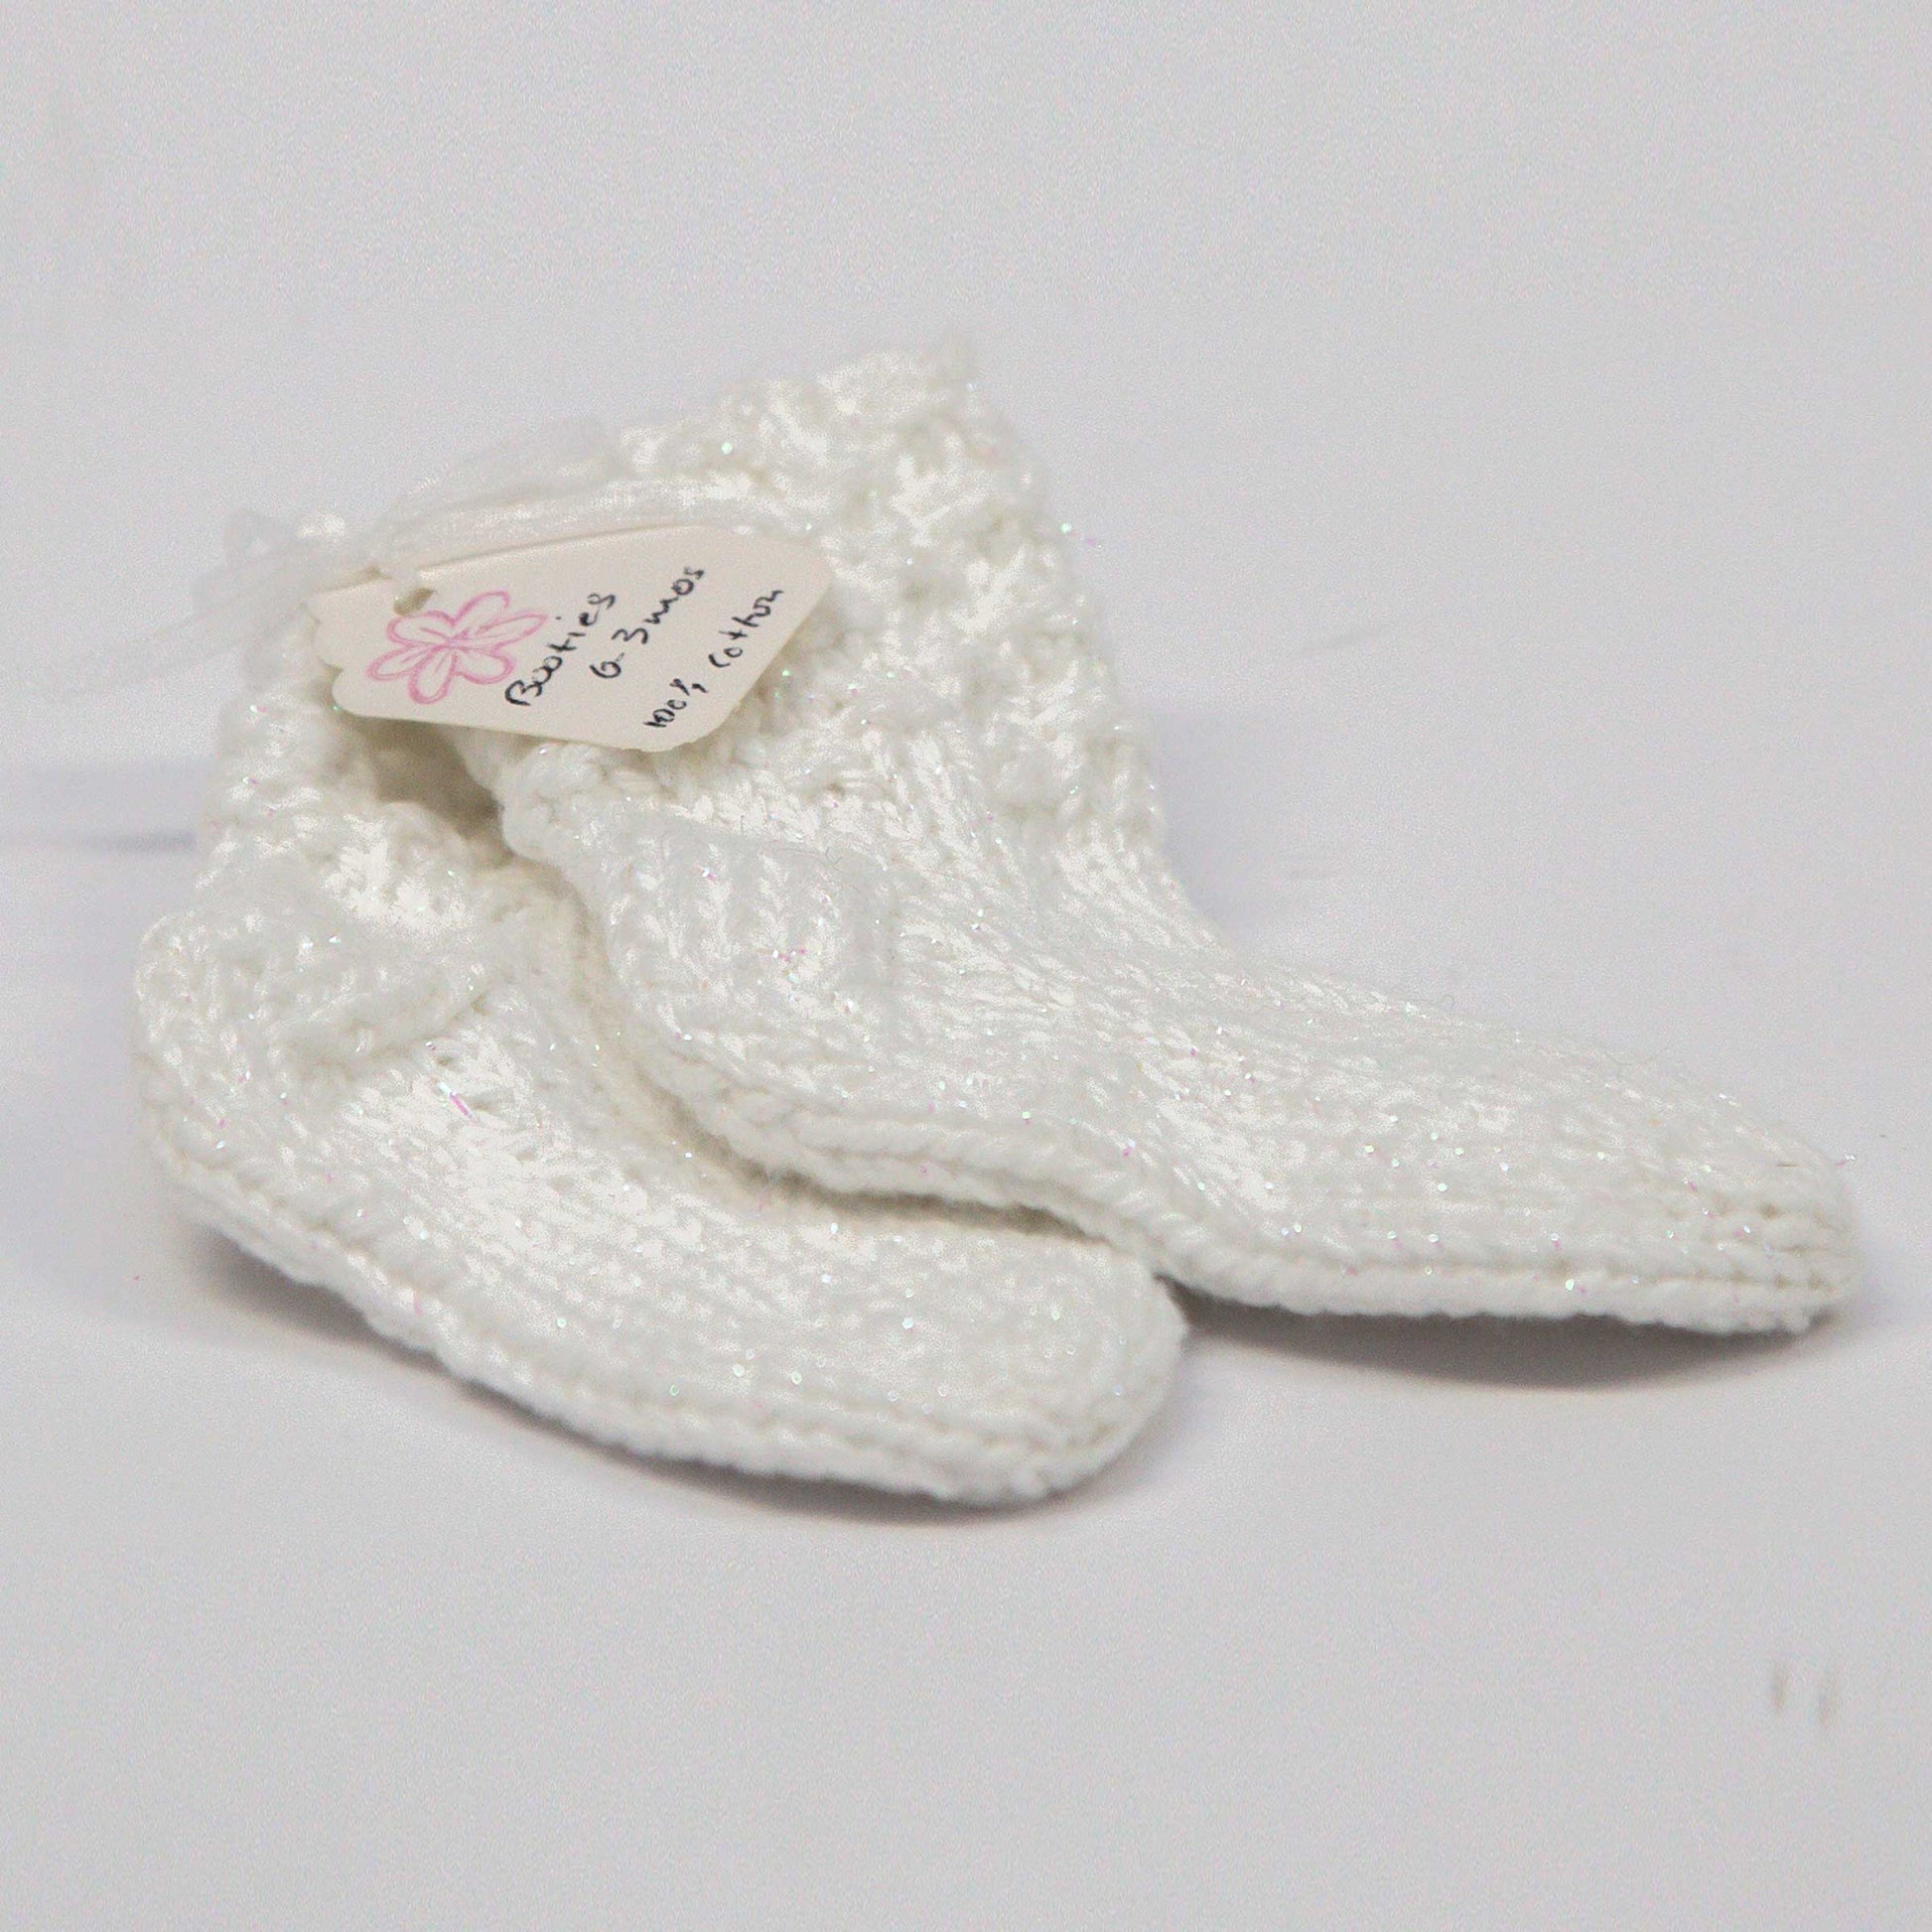 Baby Booties, 0-3 months, Hand Knit, Cotton, No Seam, Washable, White